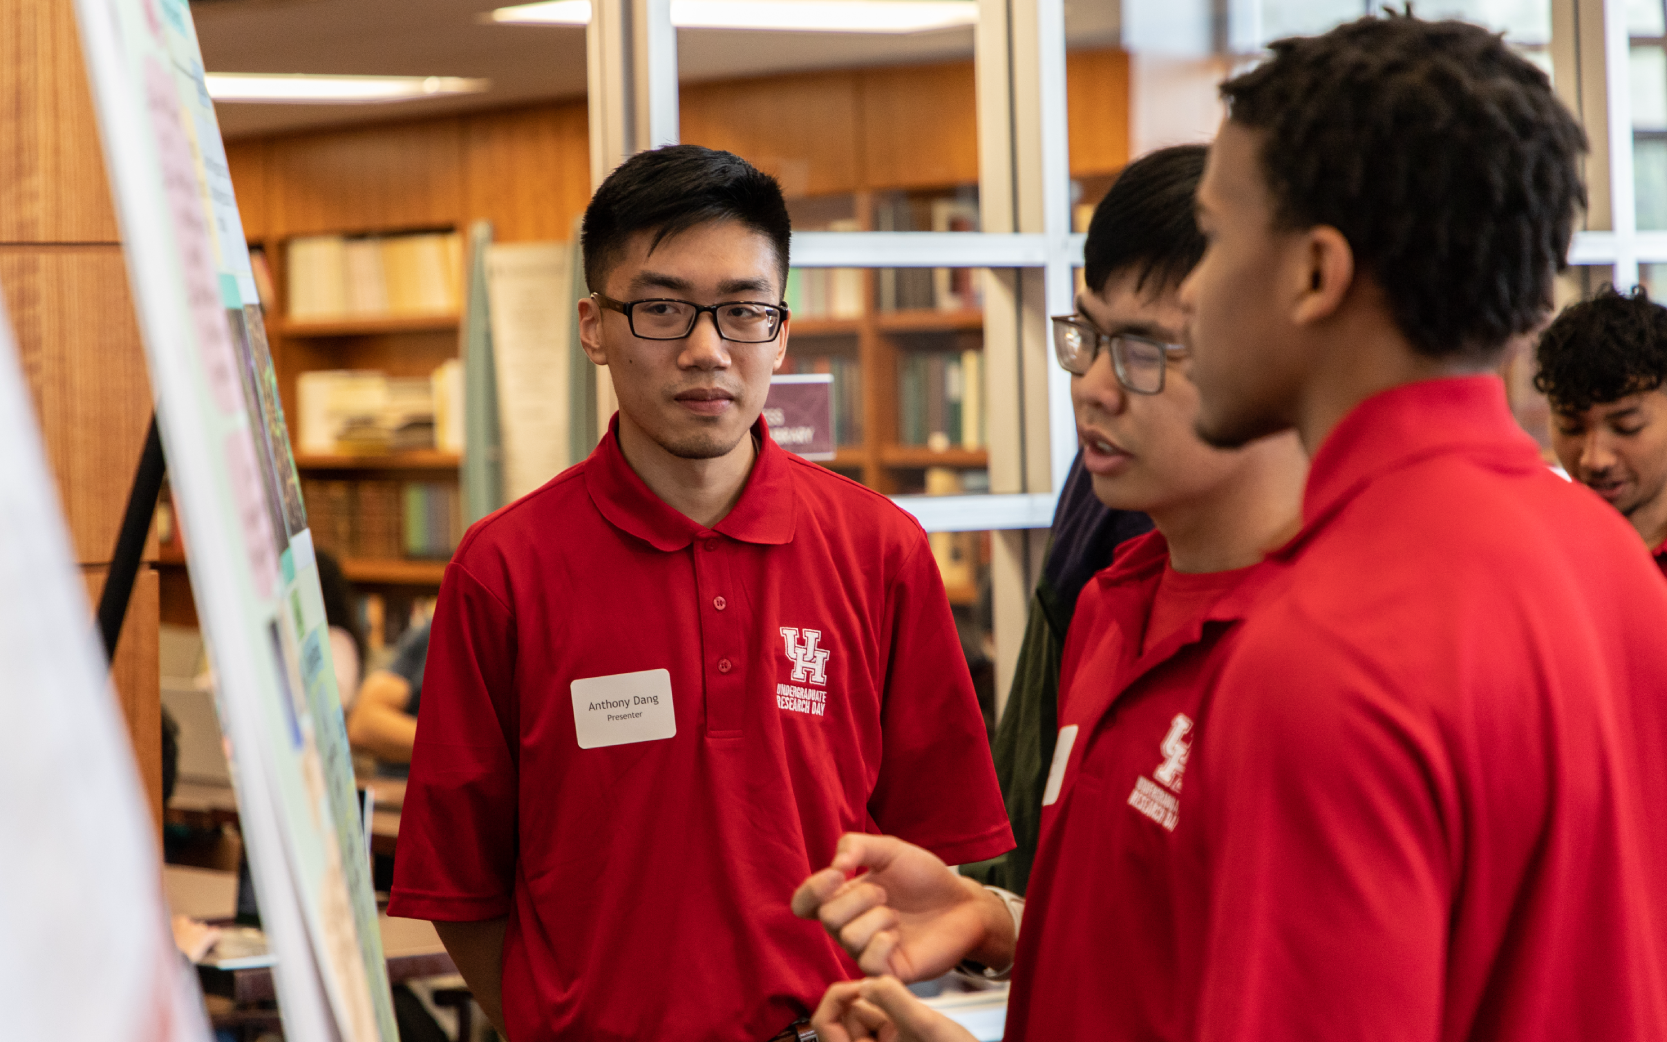 Students in the Spotlight During Undergraduate Research Day